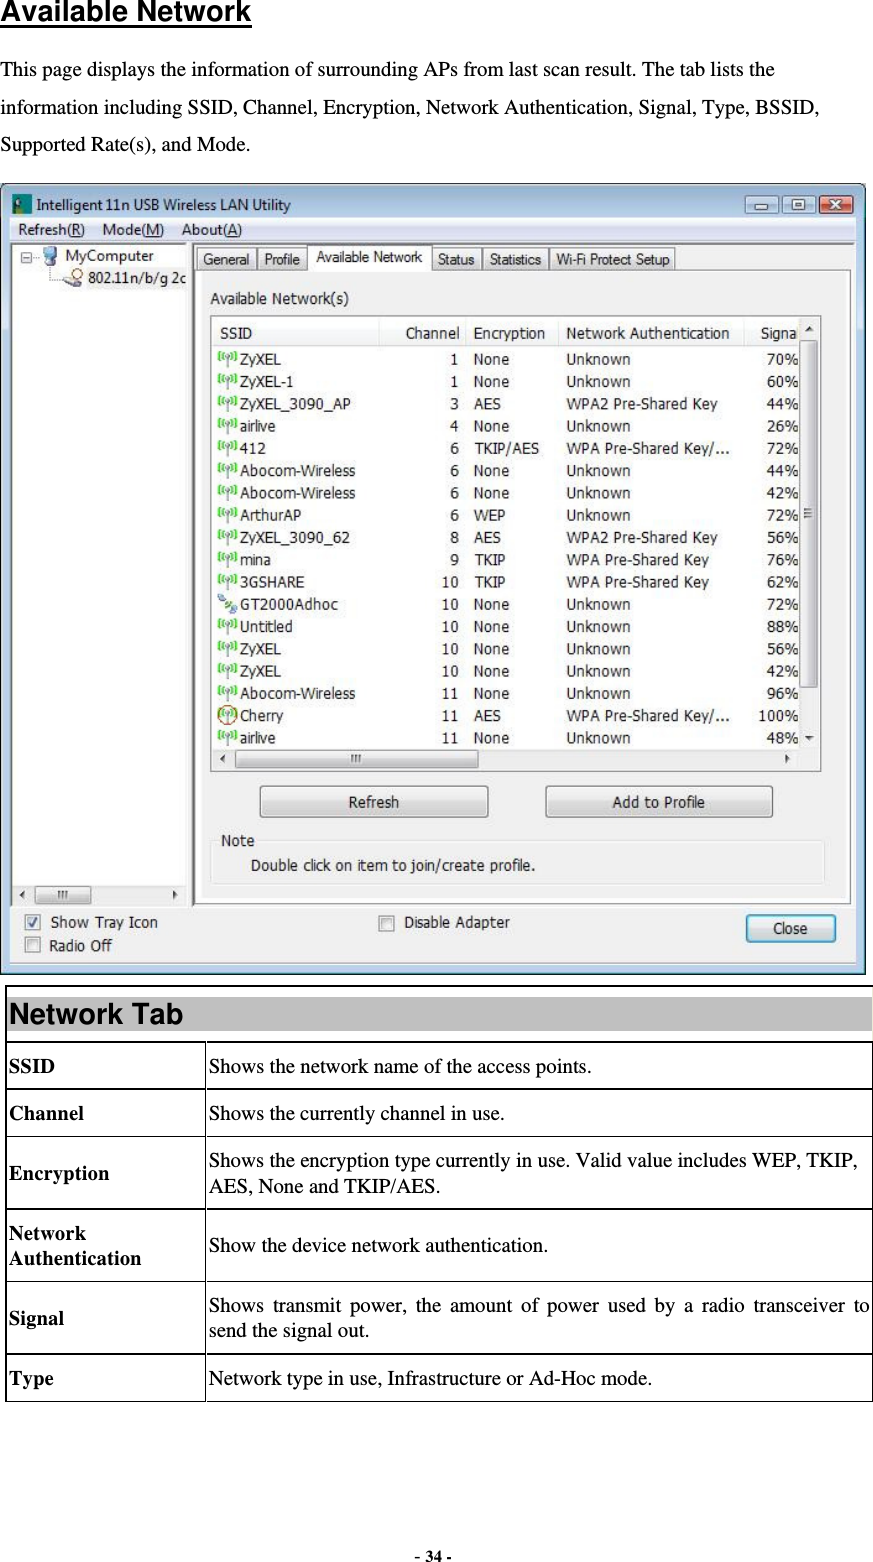  - 34 - Available Network This page displays the information of surrounding APs from last scan result. The tab lists the information including SSID, Channel, Encryption, Network Authentication, Signal, Type, BSSID, Supported Rate(s), and Mode.  Network Tab SSID  Shows the network name of the access points. Channel  Shows the currently channel in use. Encryption  Shows the encryption type currently in use. Valid value includes WEP, TKIP, AES, None and TKIP/AES. Network Authentication  Show the device network authentication. Signal  Shows transmit power, the amount of power used by a radio transceiver to send the signal out. Type Network type in use, Infrastructure or Ad-Hoc mode. 